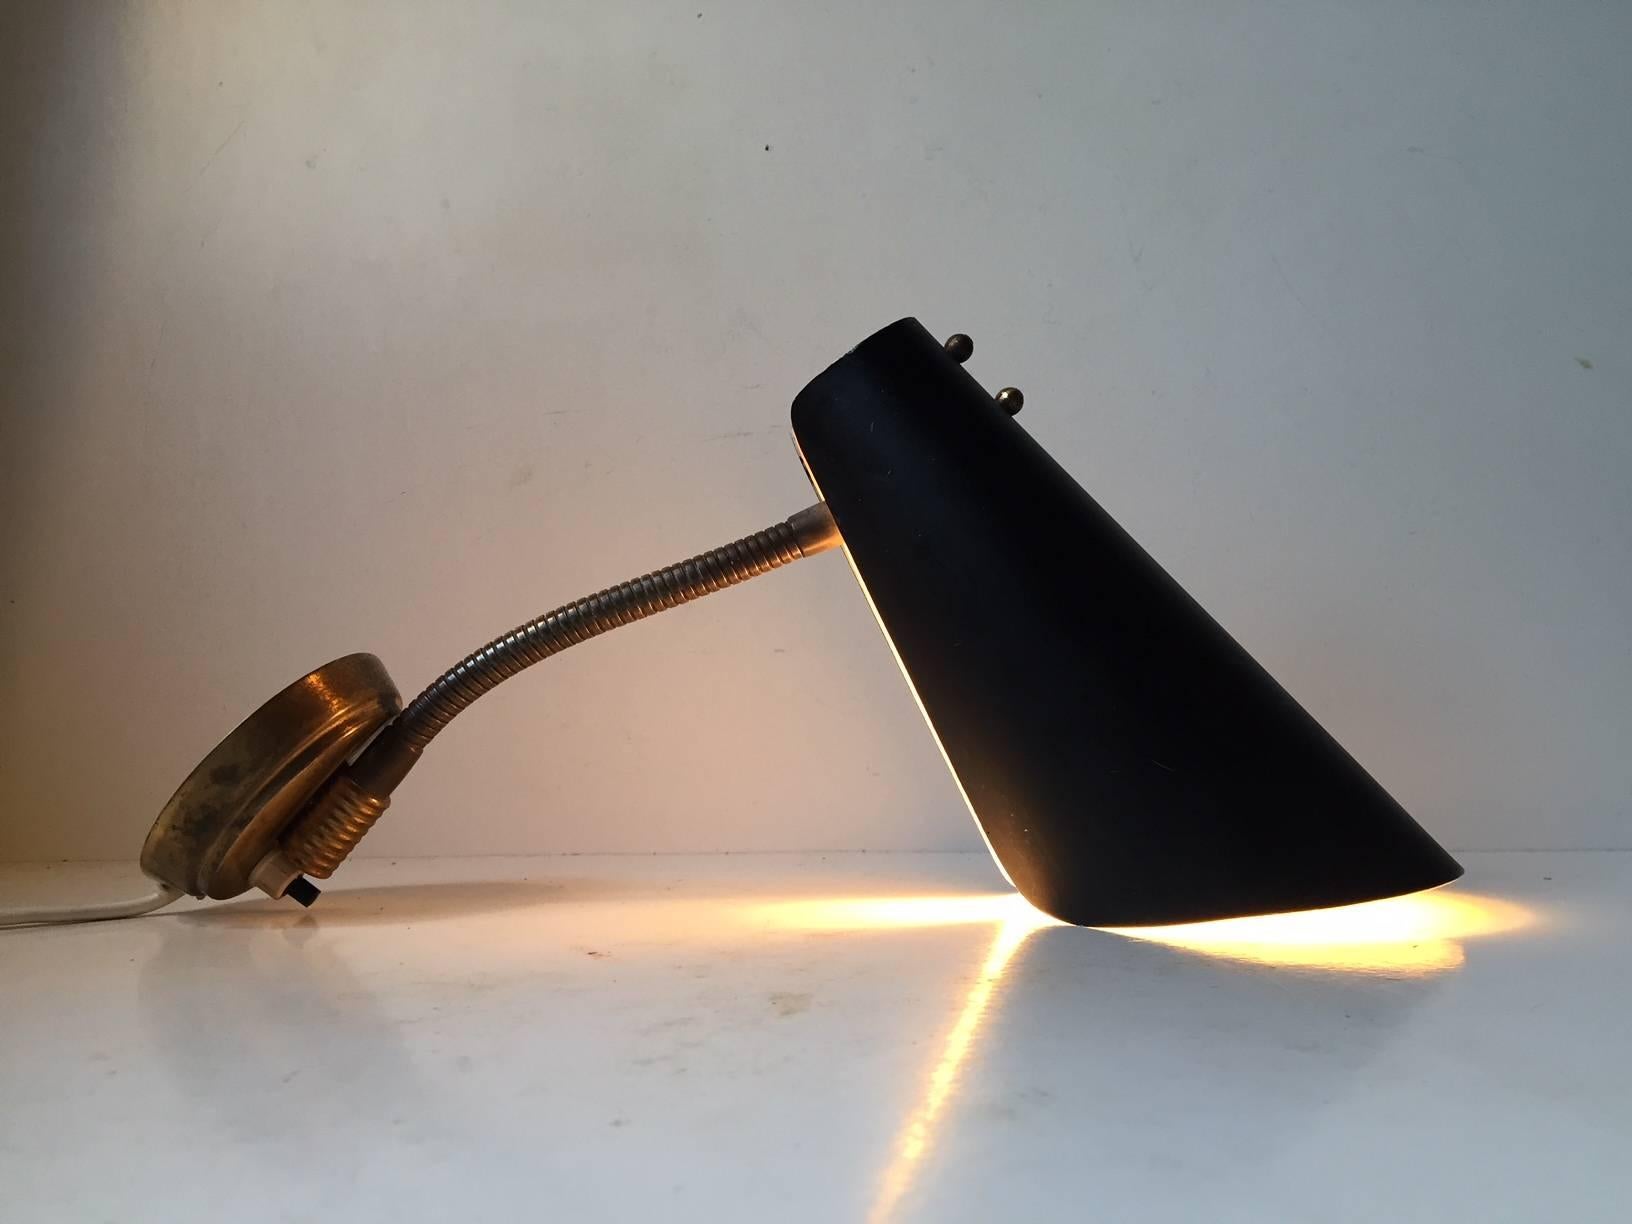 This adjustable wall lamp was both designed and manufactured by Fog & Mørup in Denmark during the 1950s. The lamp features a folded matté black shade and a flexible brass gooseneck. The design was inspired by the Italian manufacturer Stilnovo, as